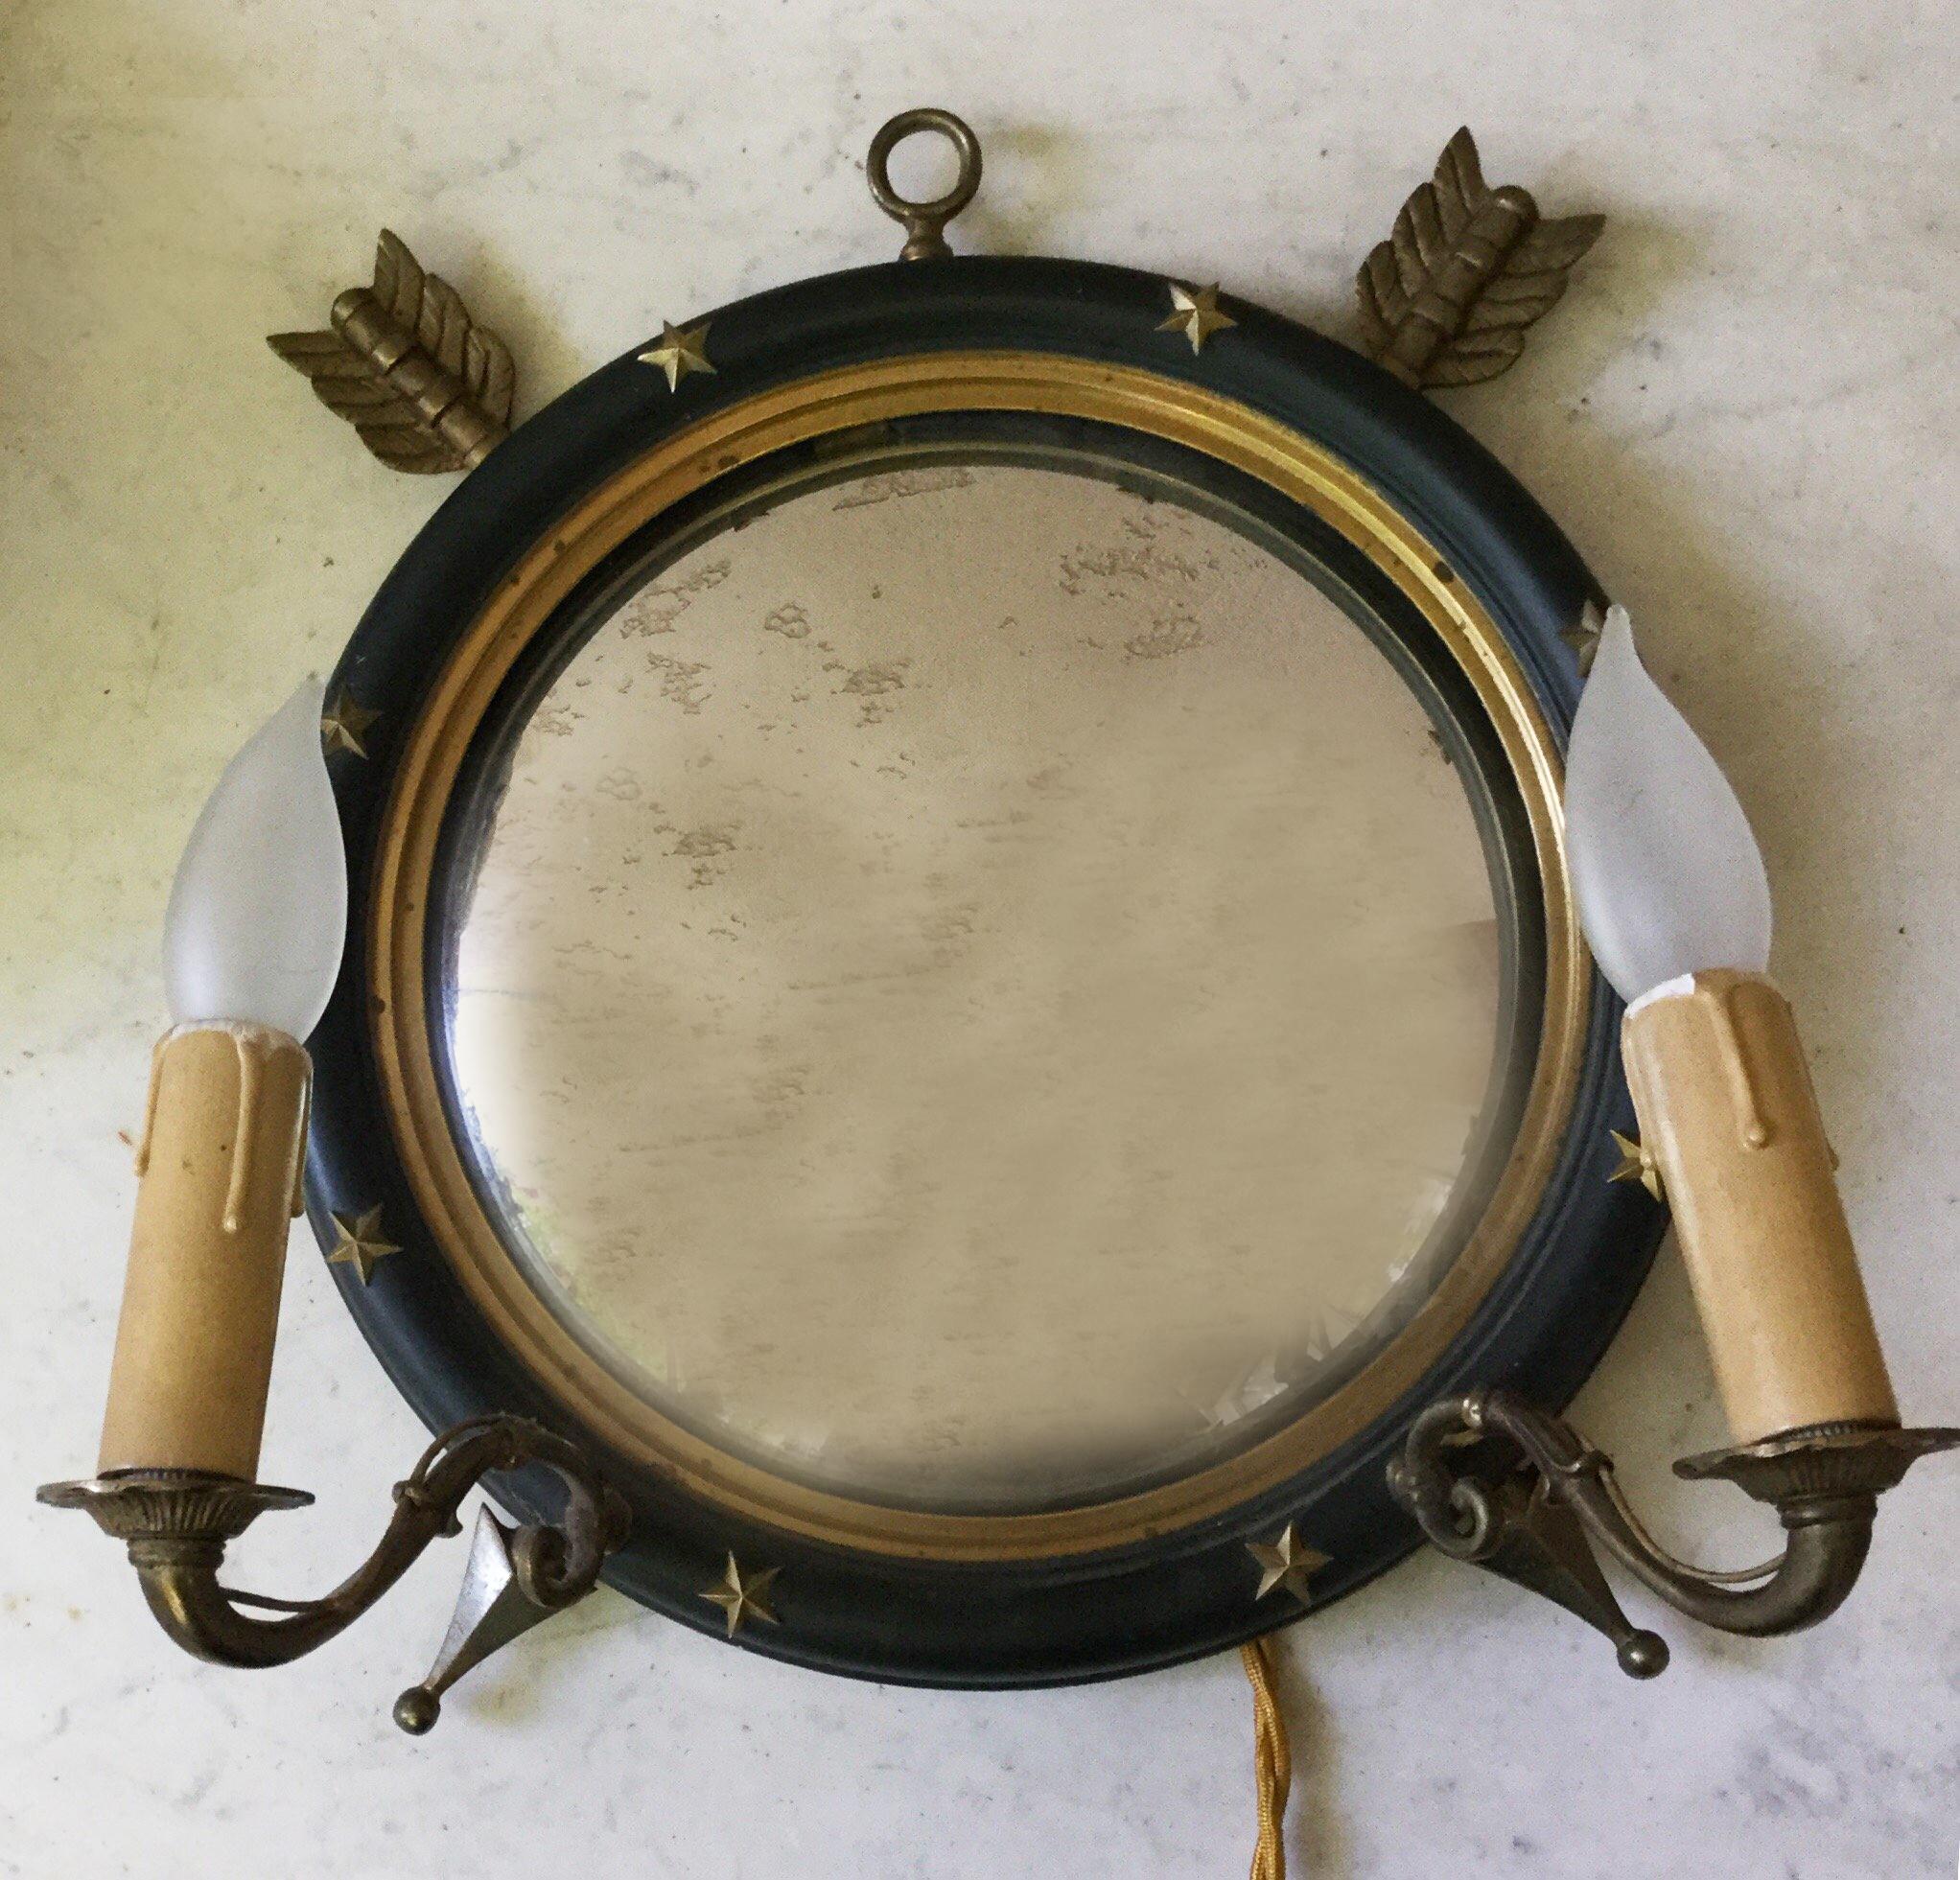 French Empire style sconce with convex mirror, two arrows, and gold stars, circa 1940. Rewired for USA with two sockets, 25W bulbs included.